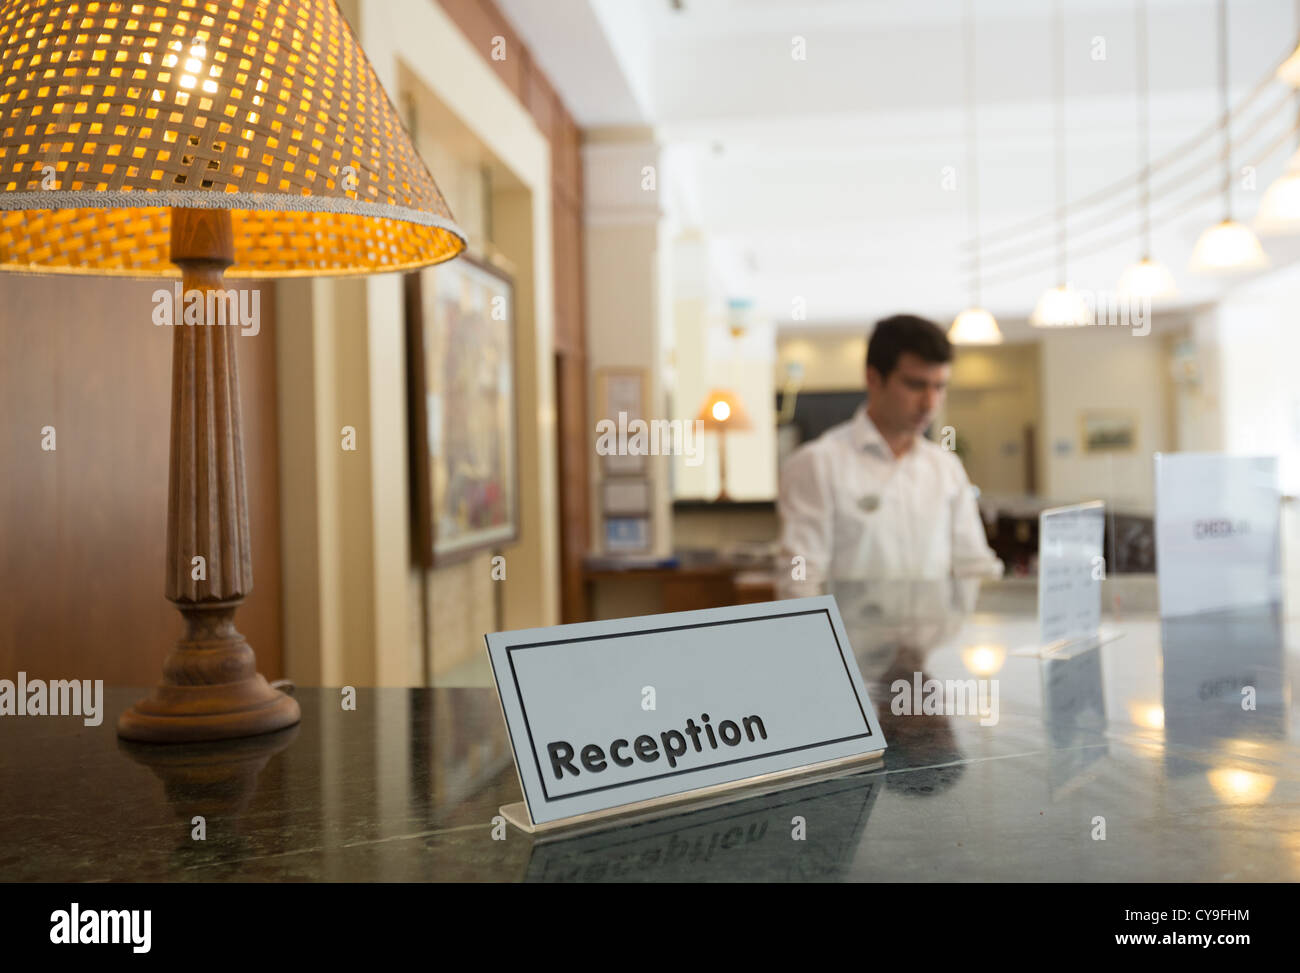 Hotel reception desk High Resolution Stock Photography and Images 1300x973